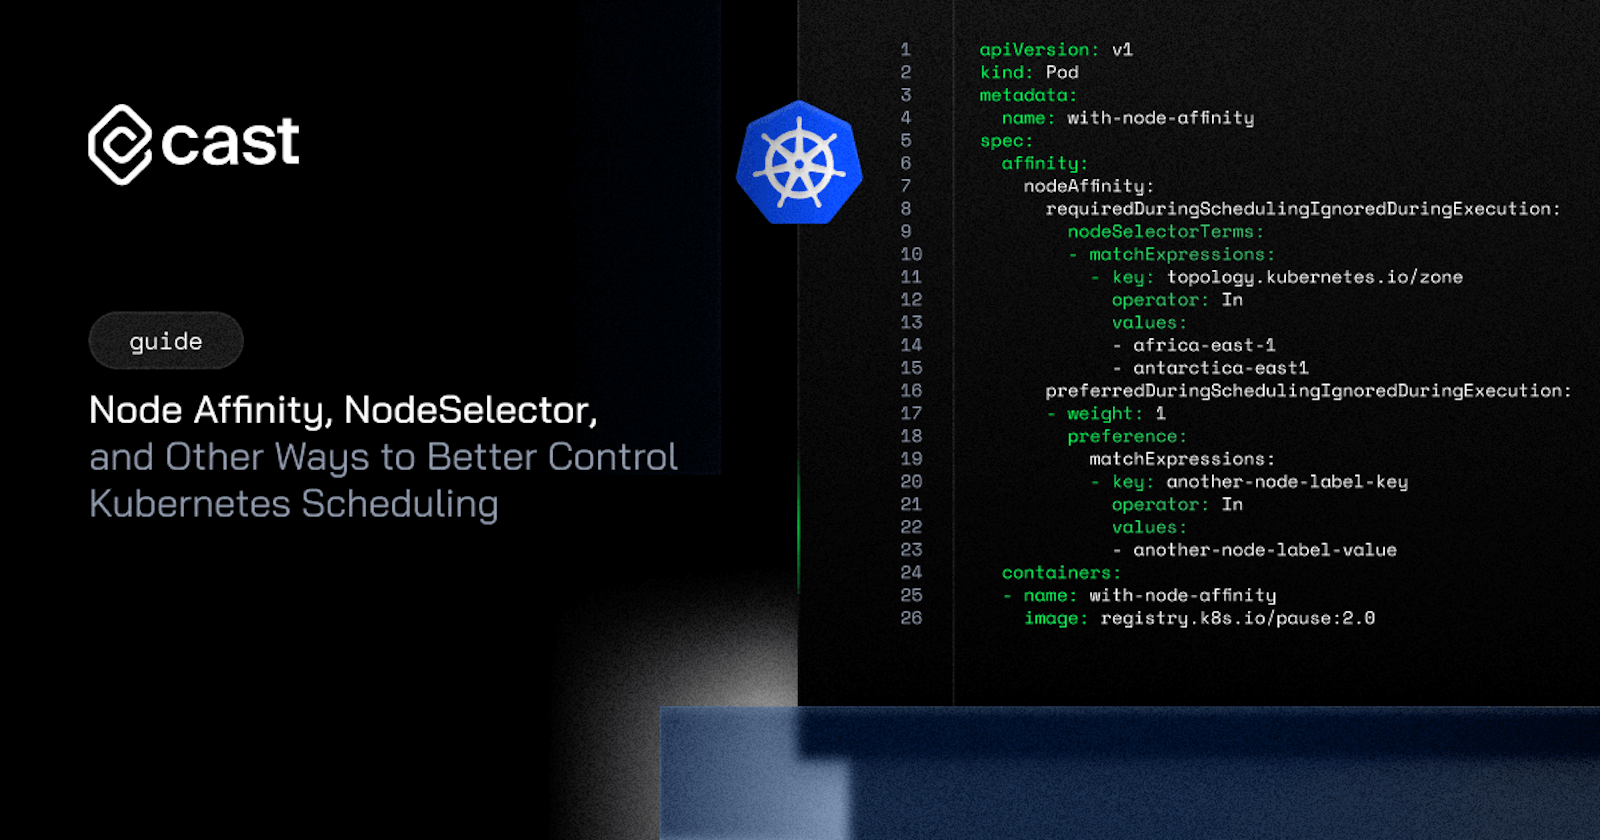 Node Affinity, Node Selector, and Other Ways to Better Control Kubernetes Scheduling